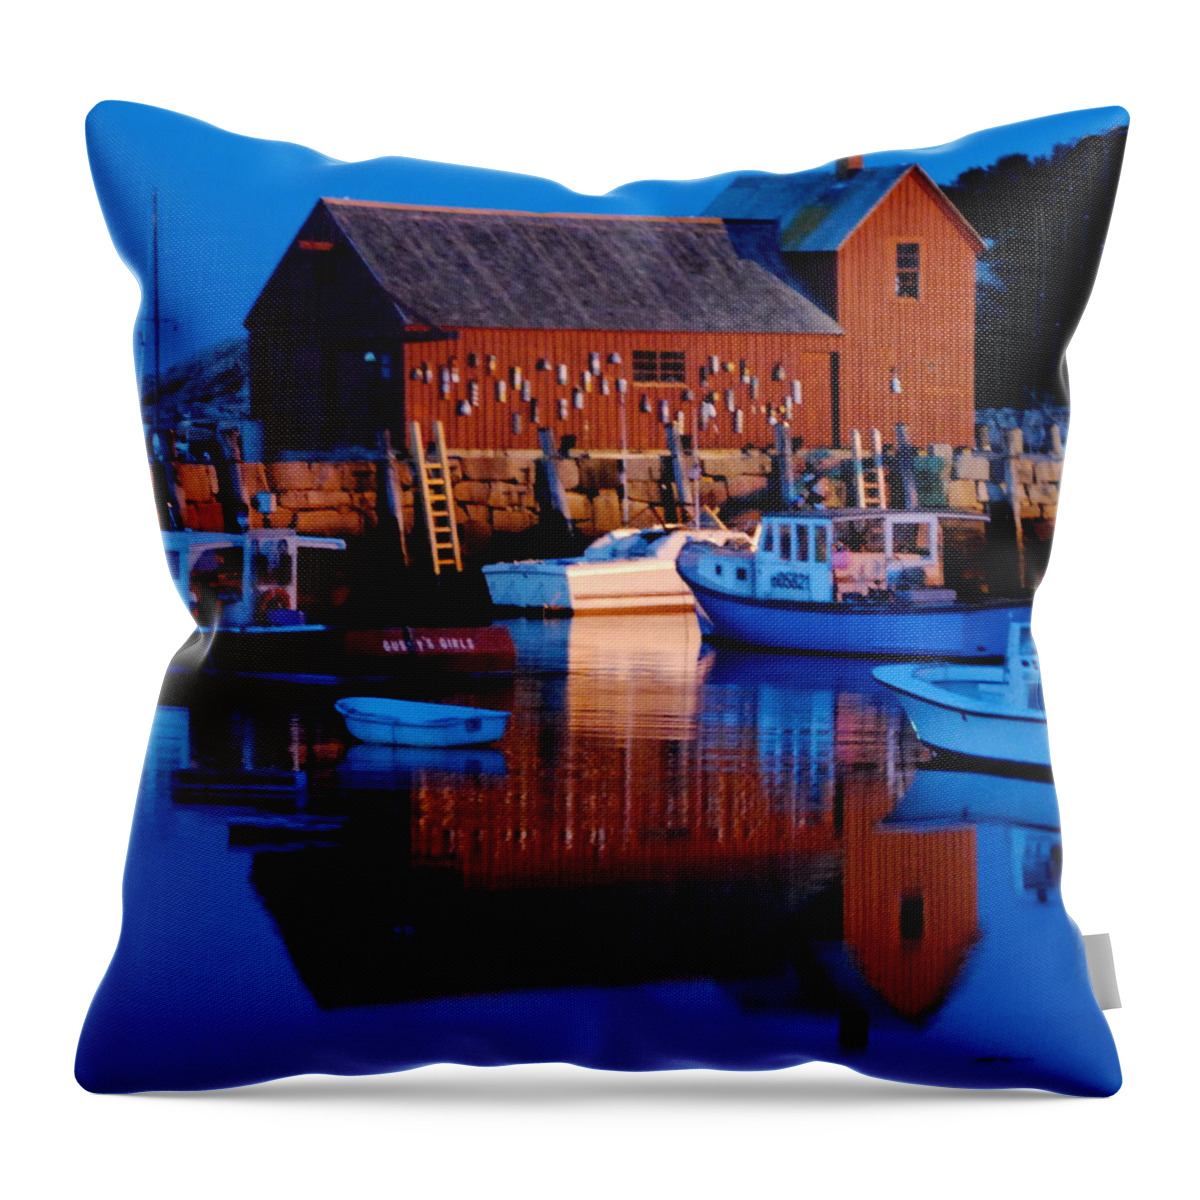 Motif #1 Throw Pillow featuring the photograph Motif Number One - Rockport Mass by Jacqueline M Lewis